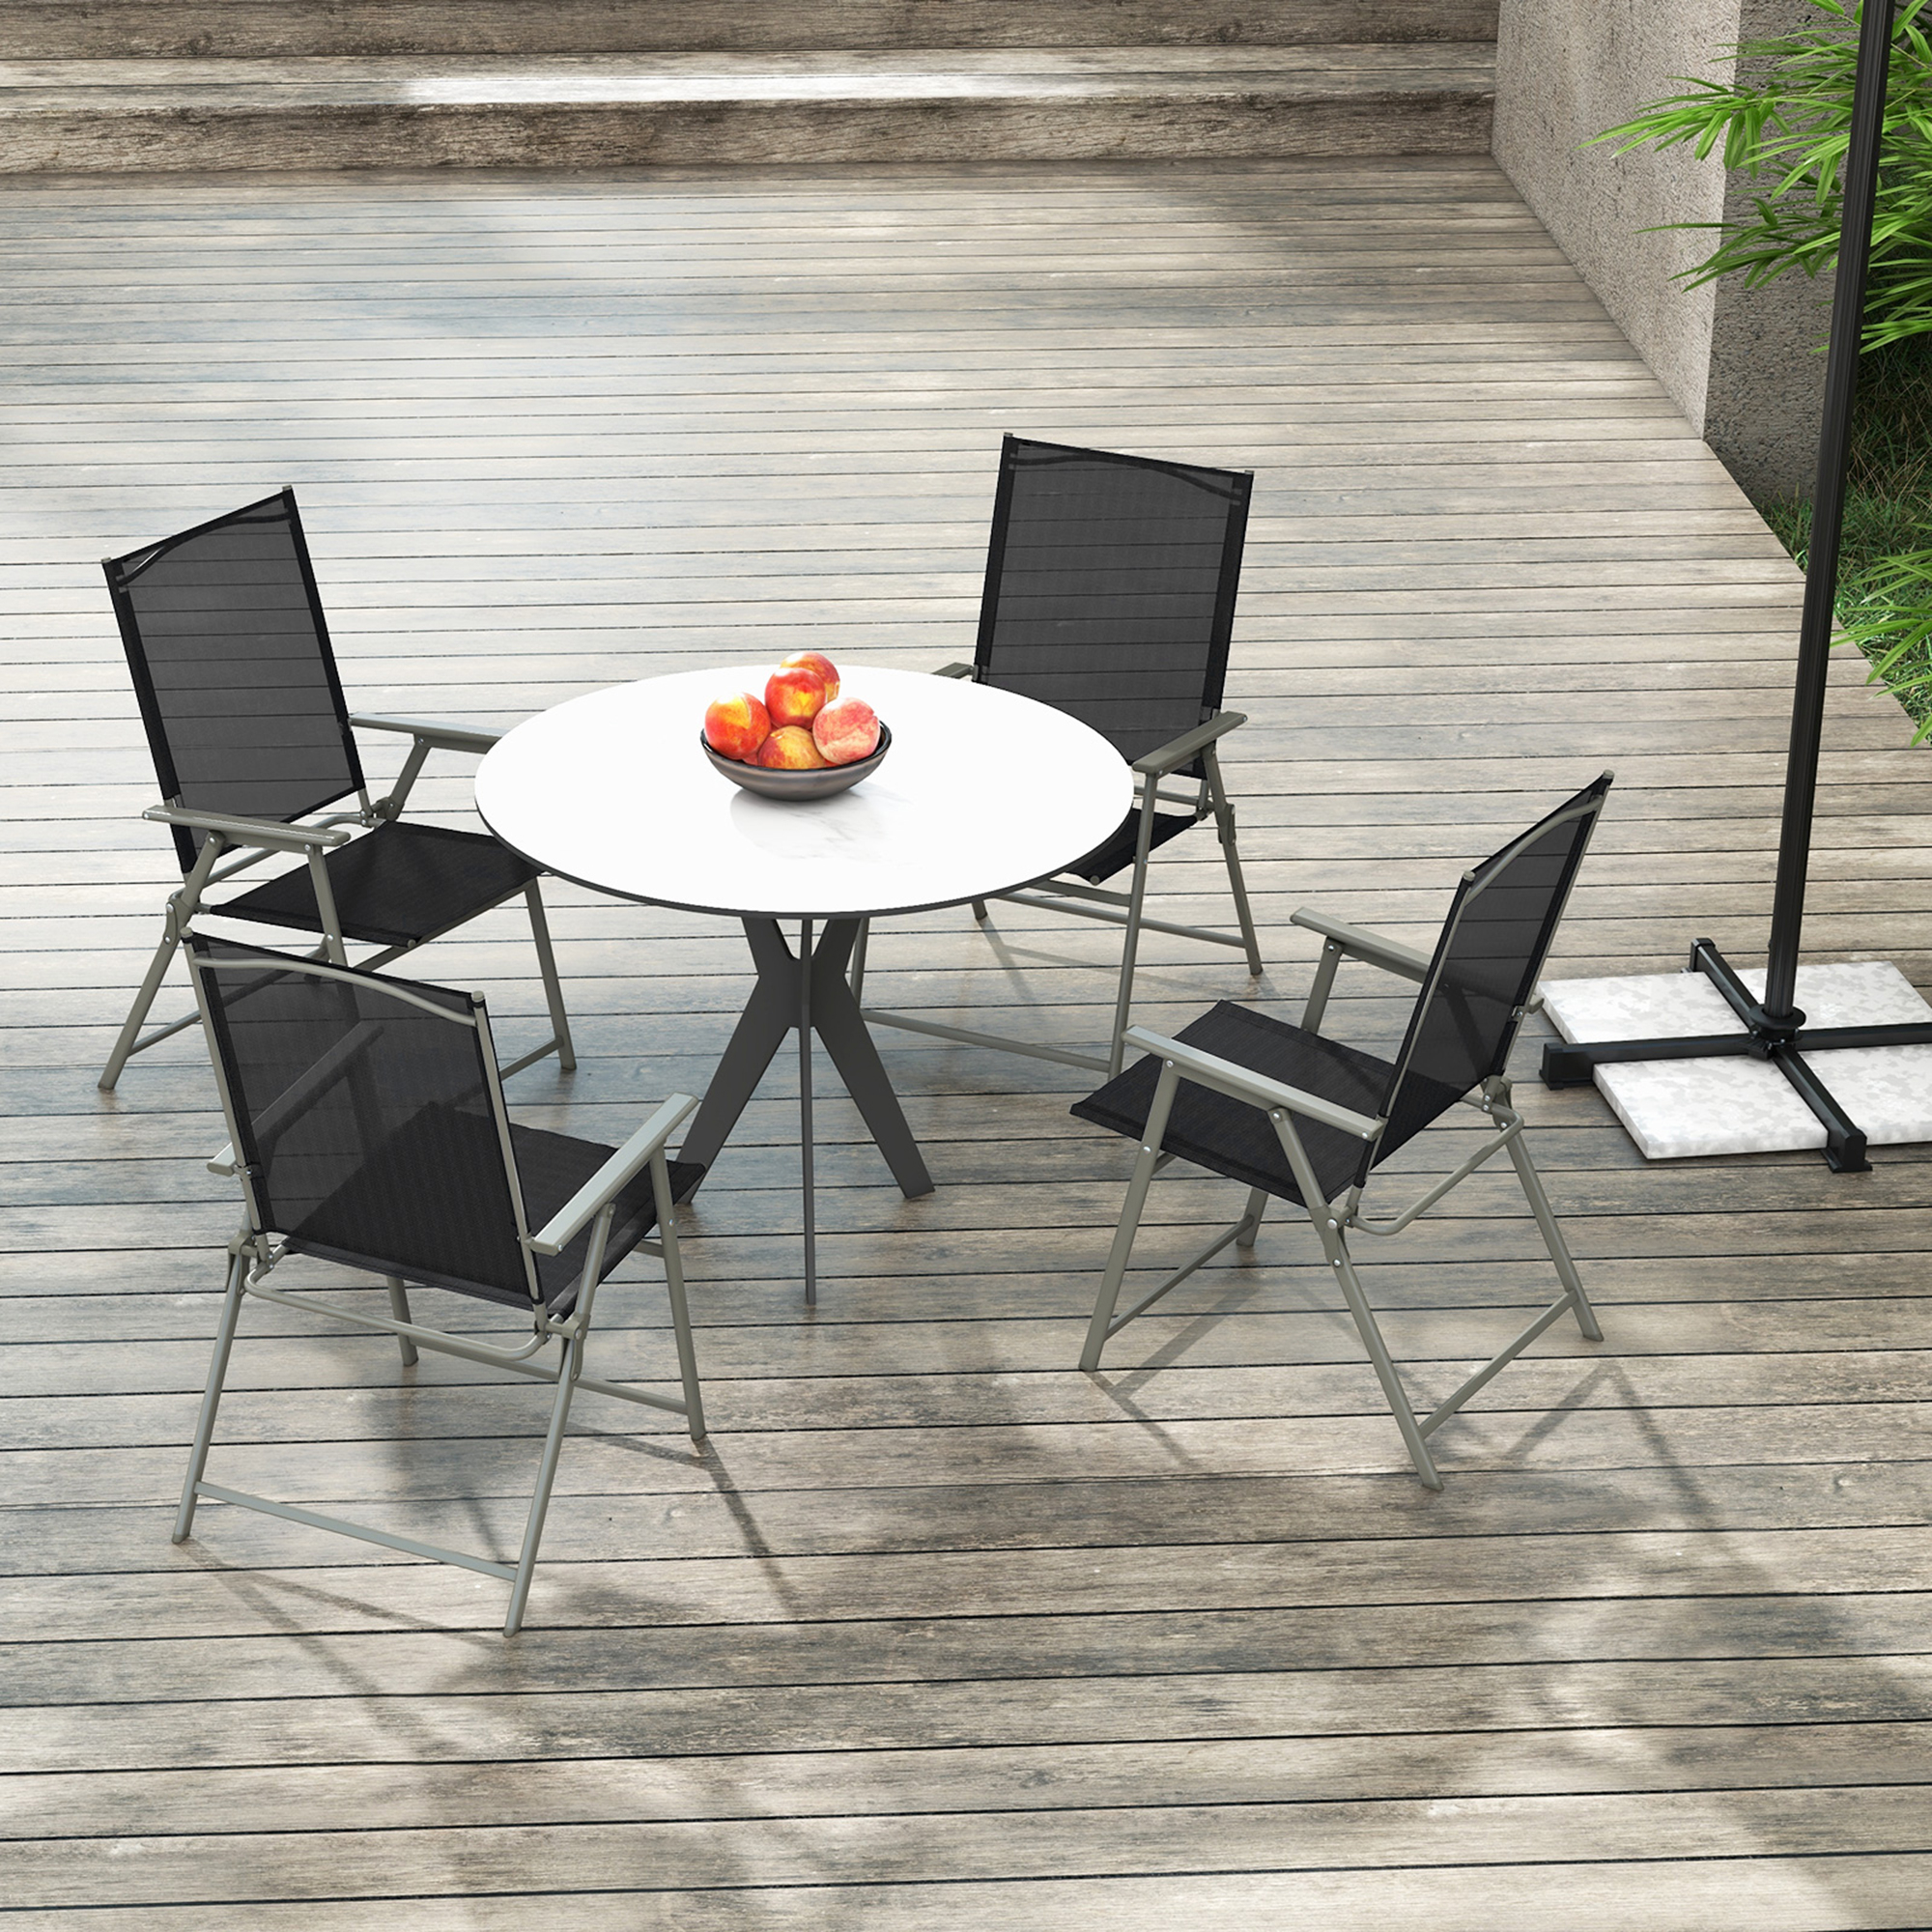 4PCS Patio Portable Metal Folding Chairs Dining Chair Set Poolside Garden